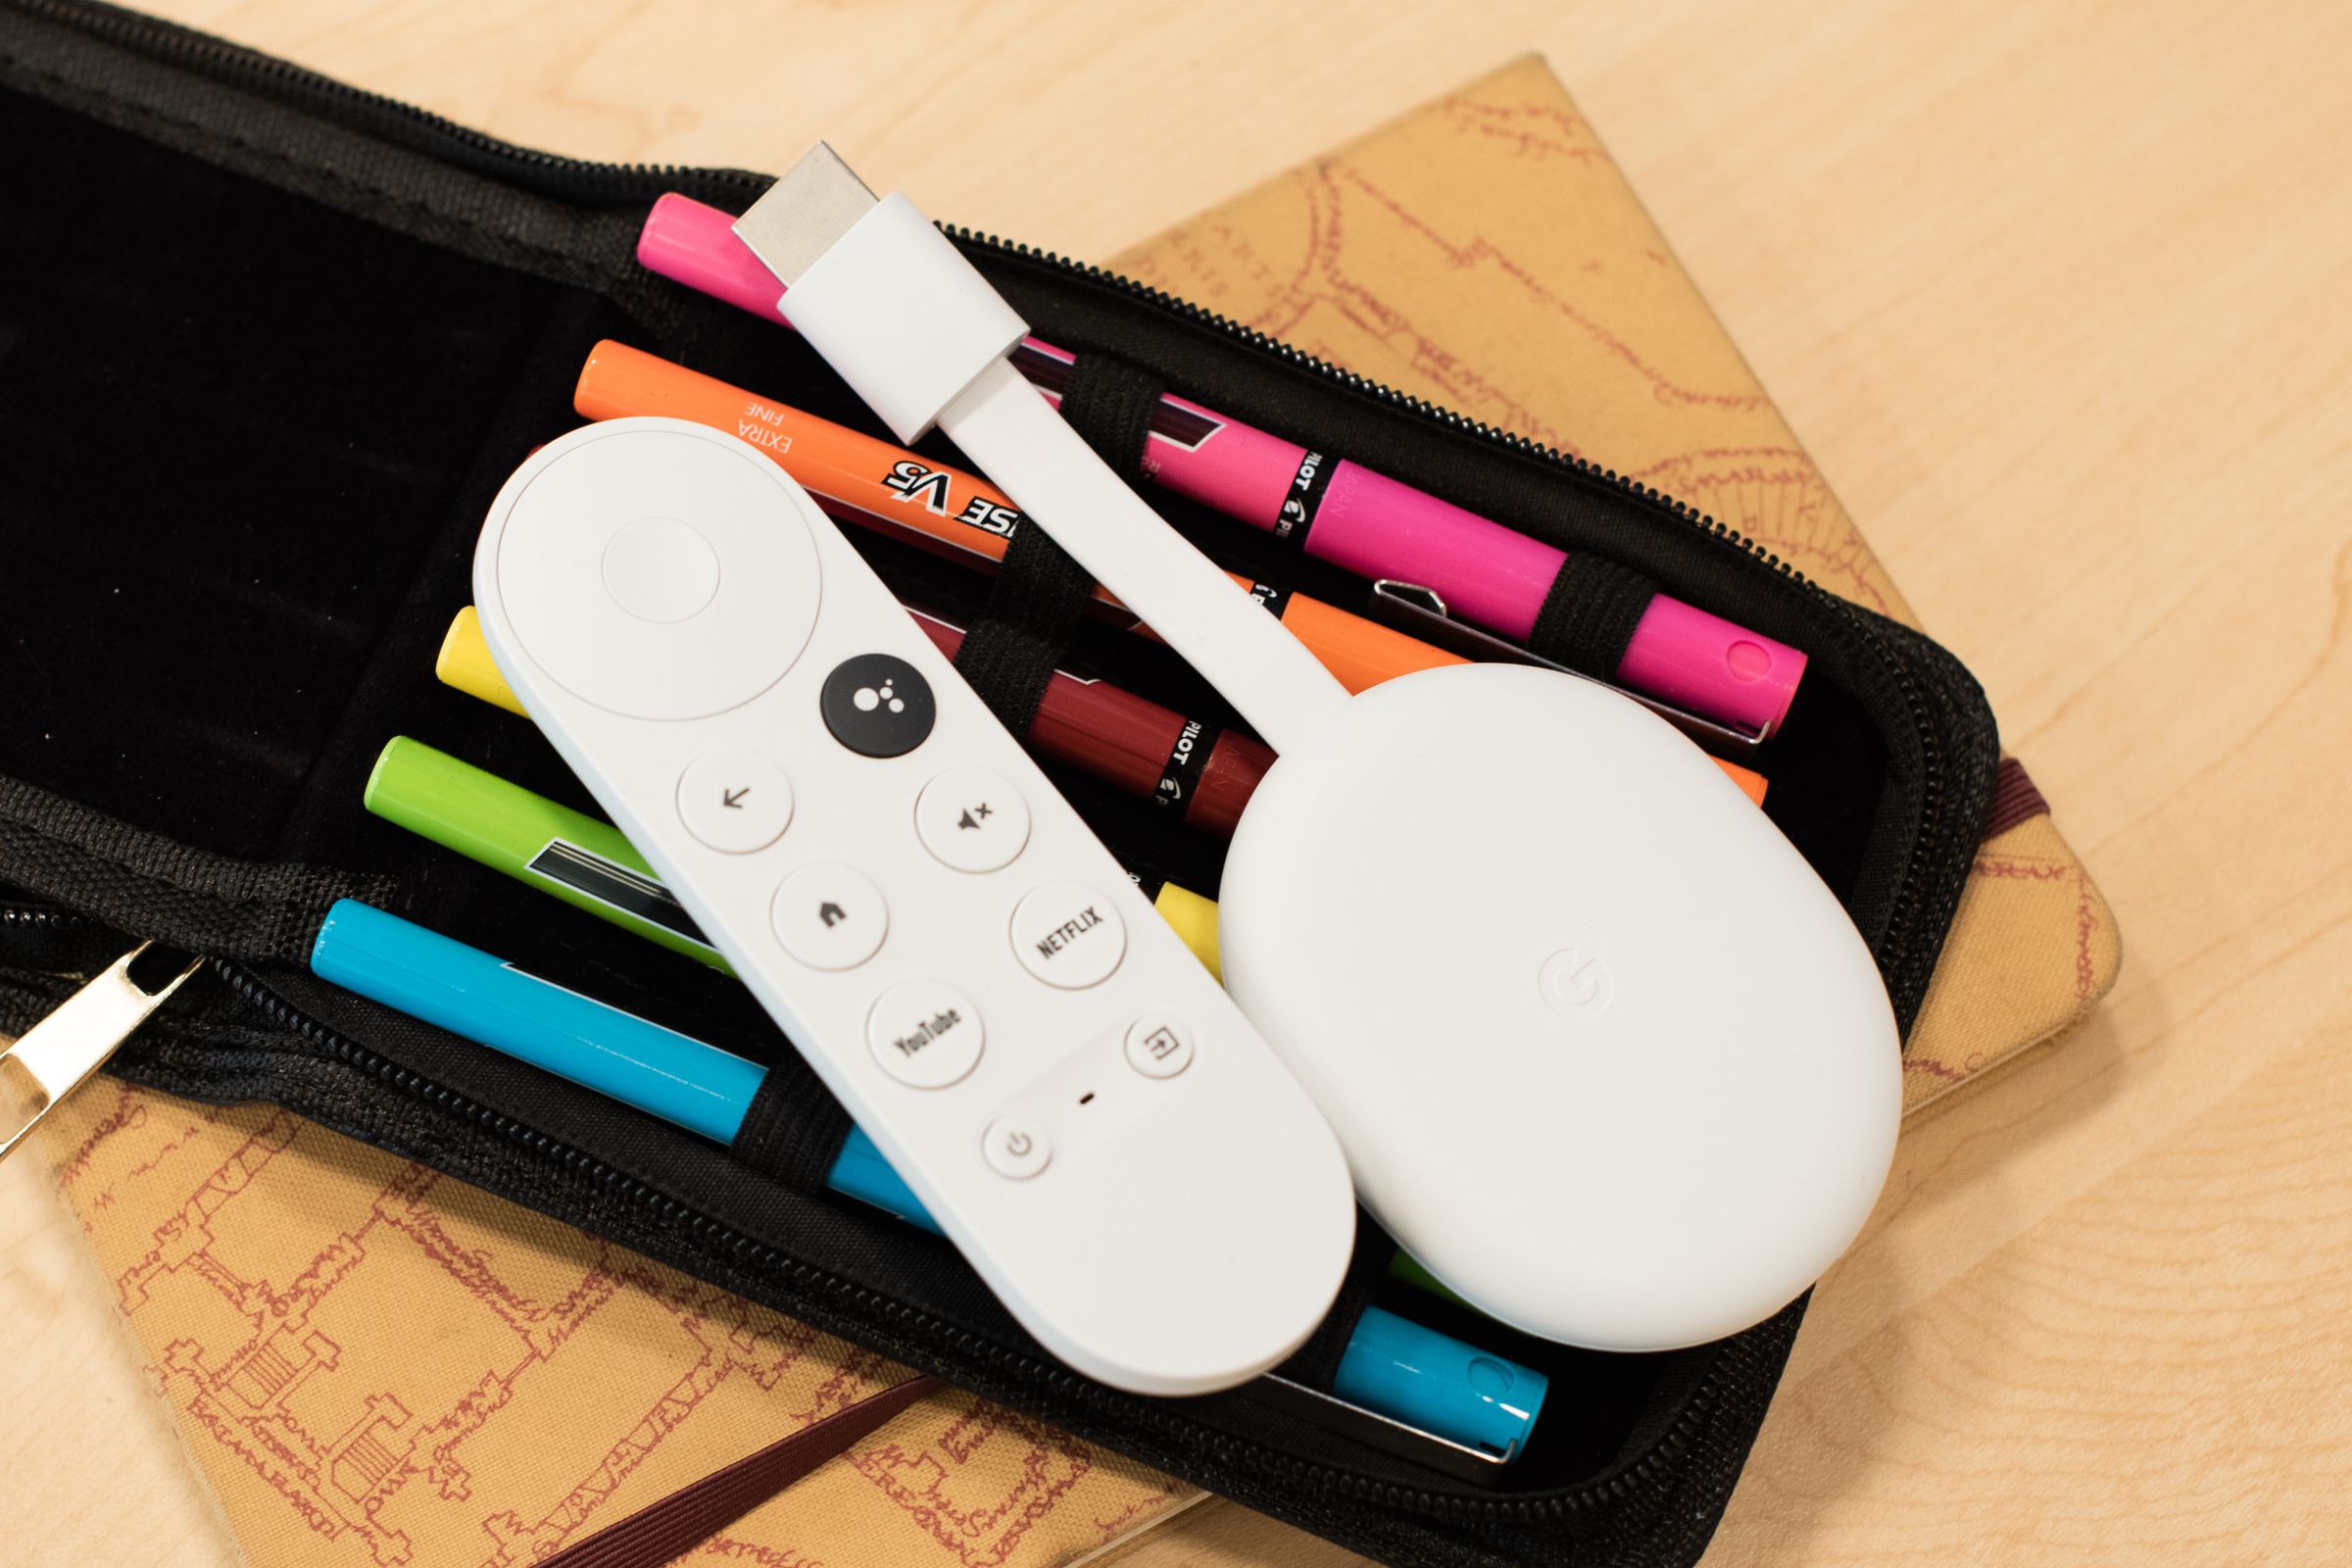 The Chromecast with Google TV (4K) with its remote lying on a pack of pens.